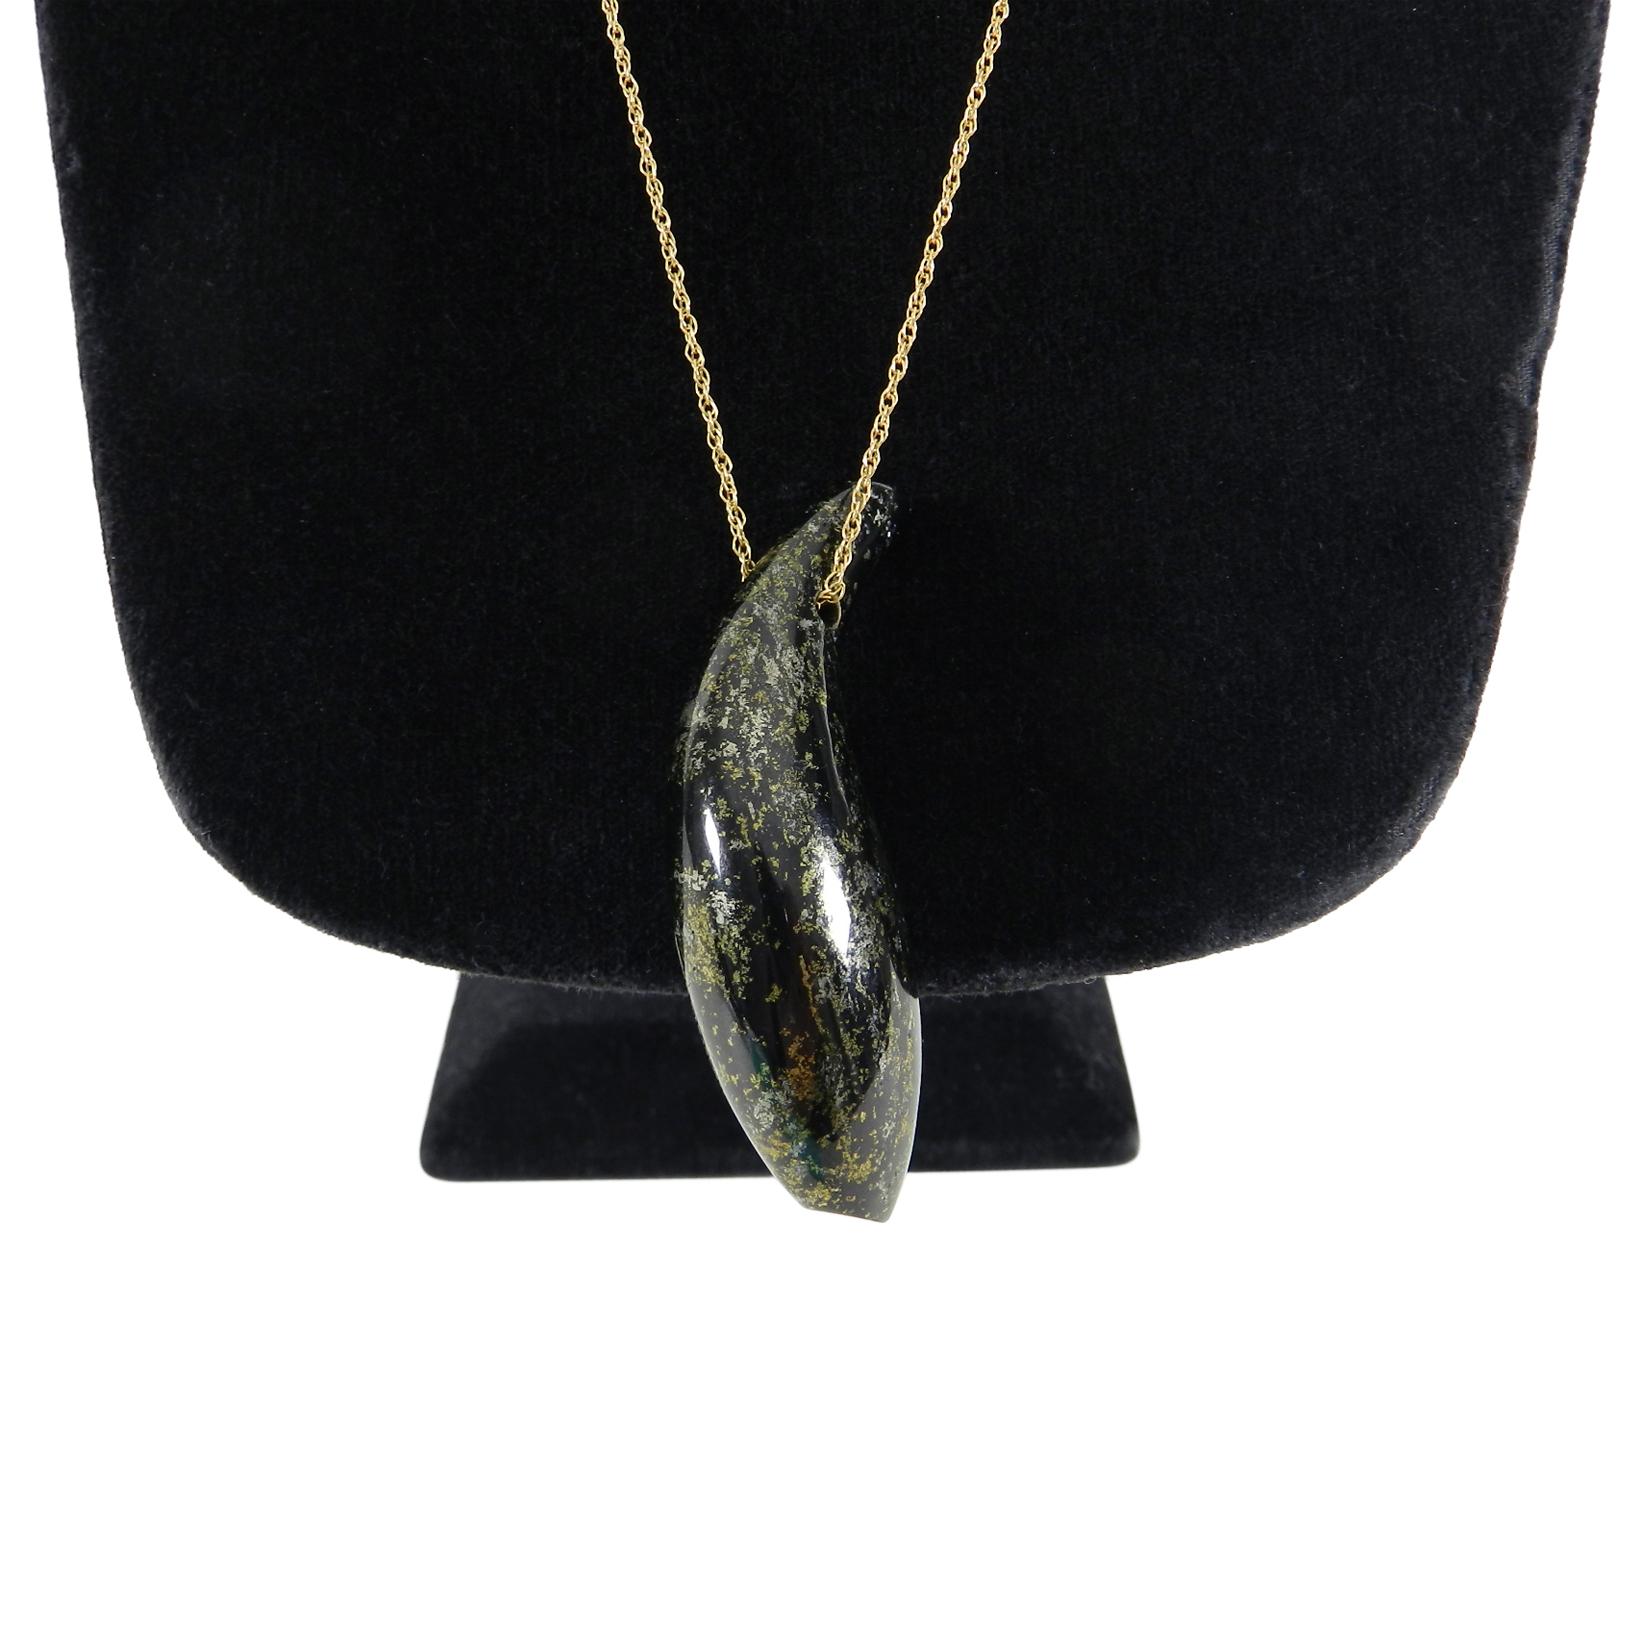 Tiffany and Co. x Frank Gehry 18k Gold and Jade Fish Pendant Necklace im Zustand „Hervorragend“ in Toronto, ON